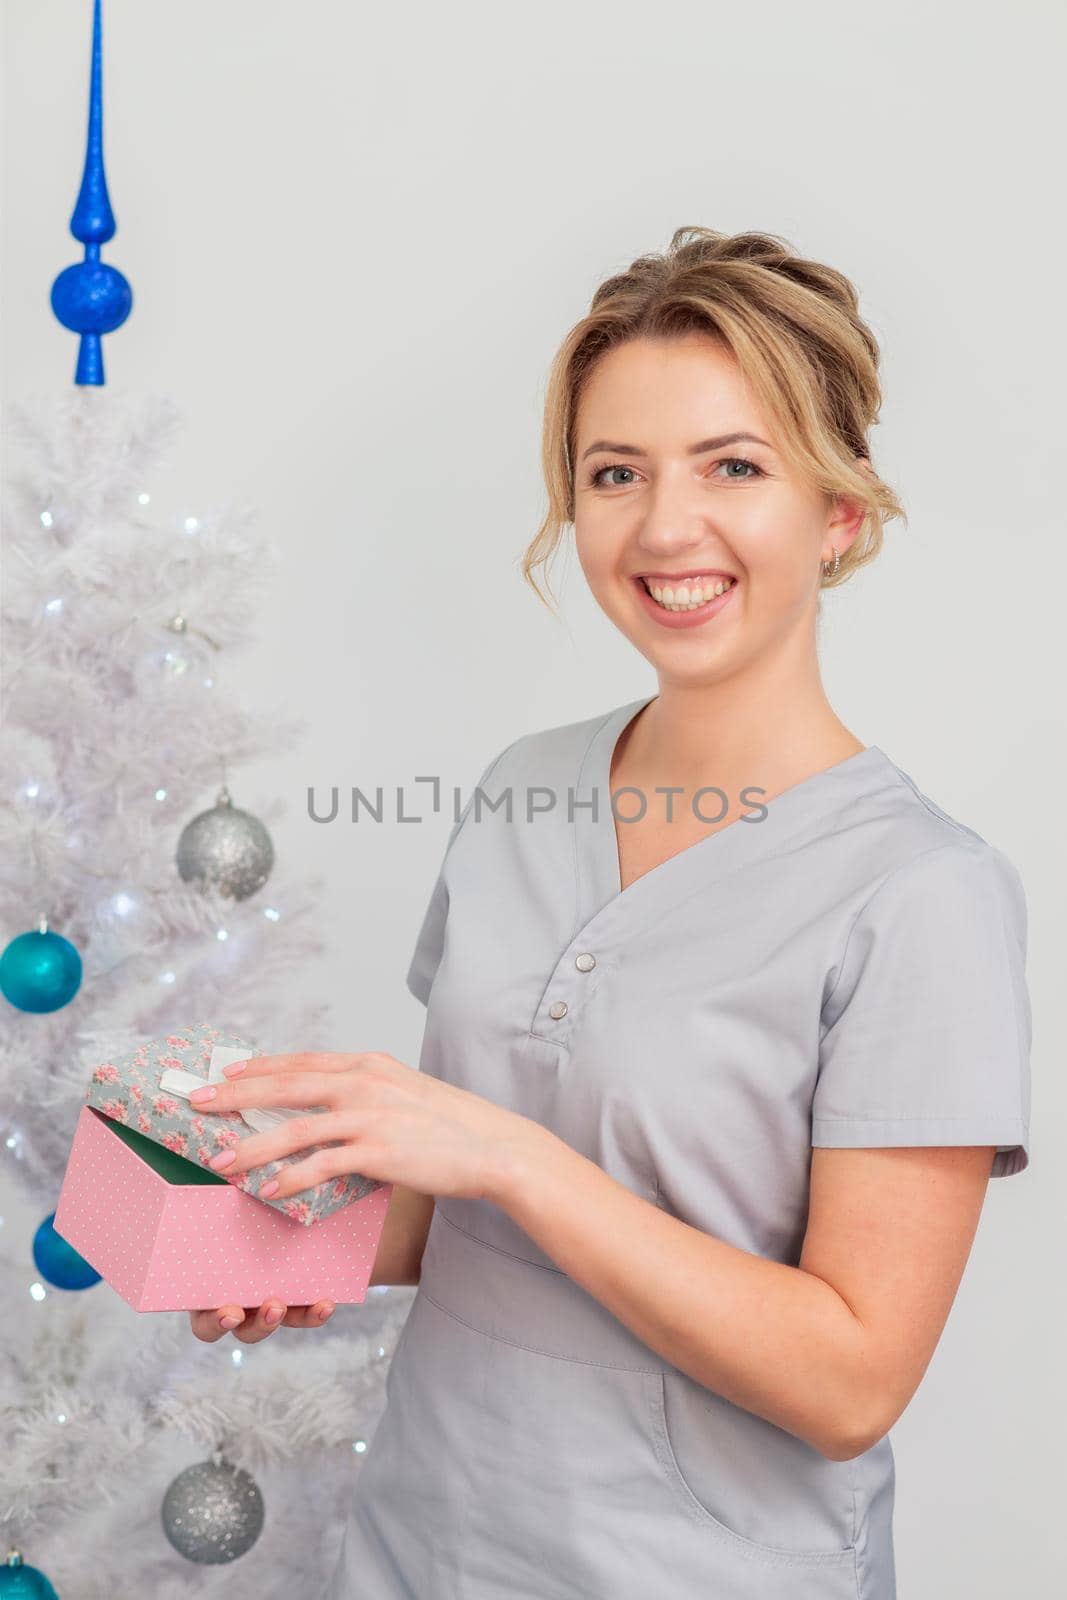 Beautiful young caucasian woman smiling in medical uniform with gift box near christmas tree on light background